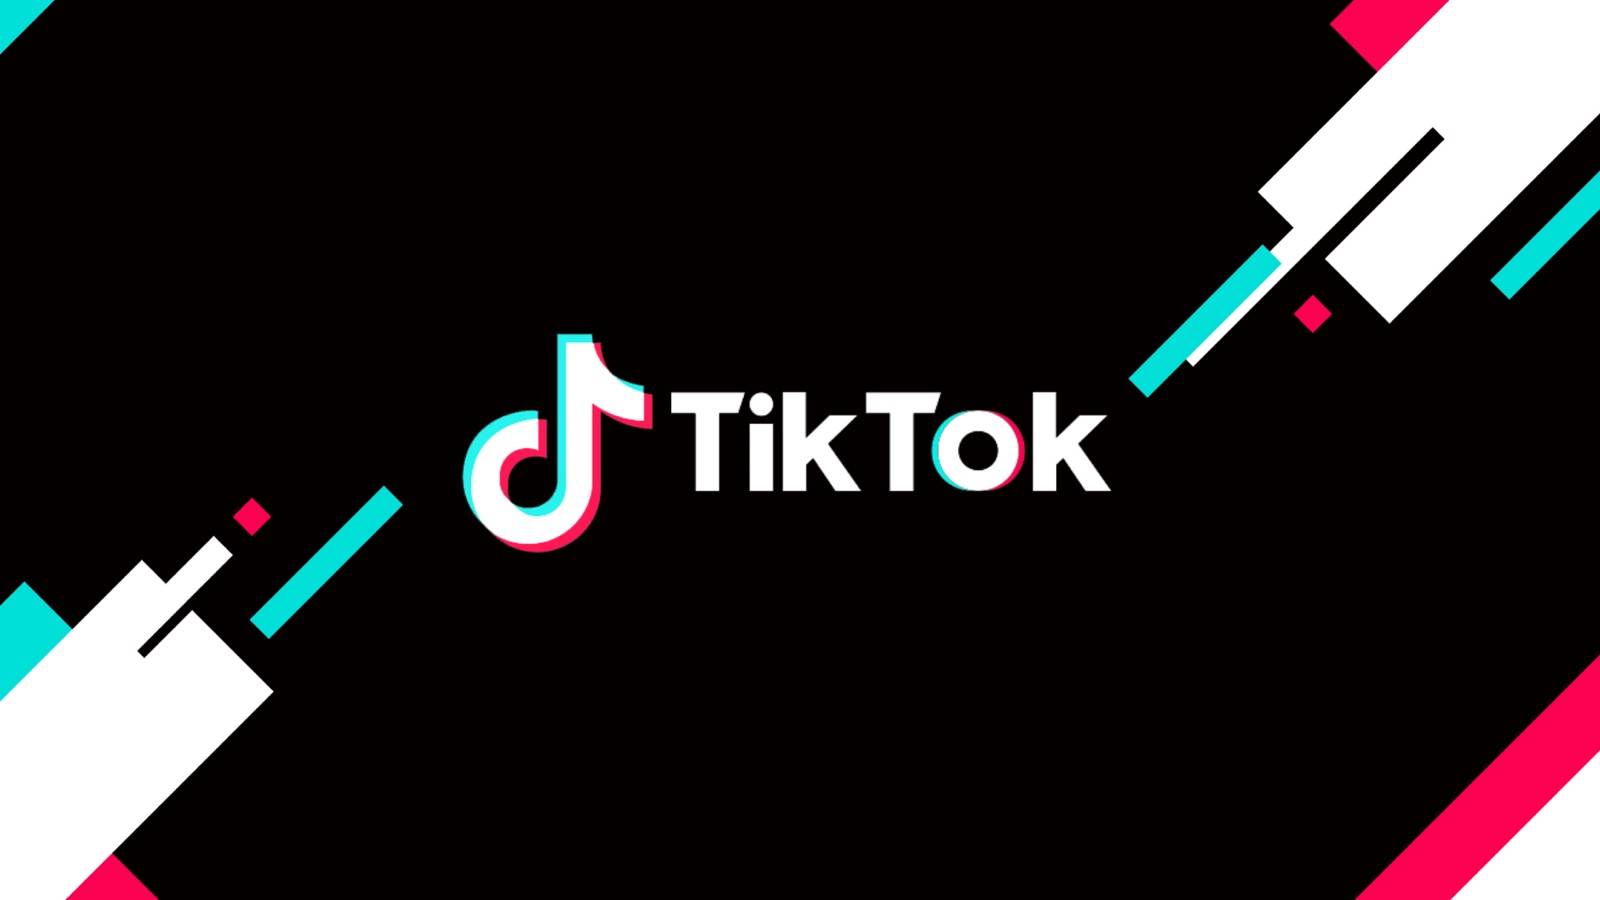 TikTok News in the Newest Update for the Phone Application